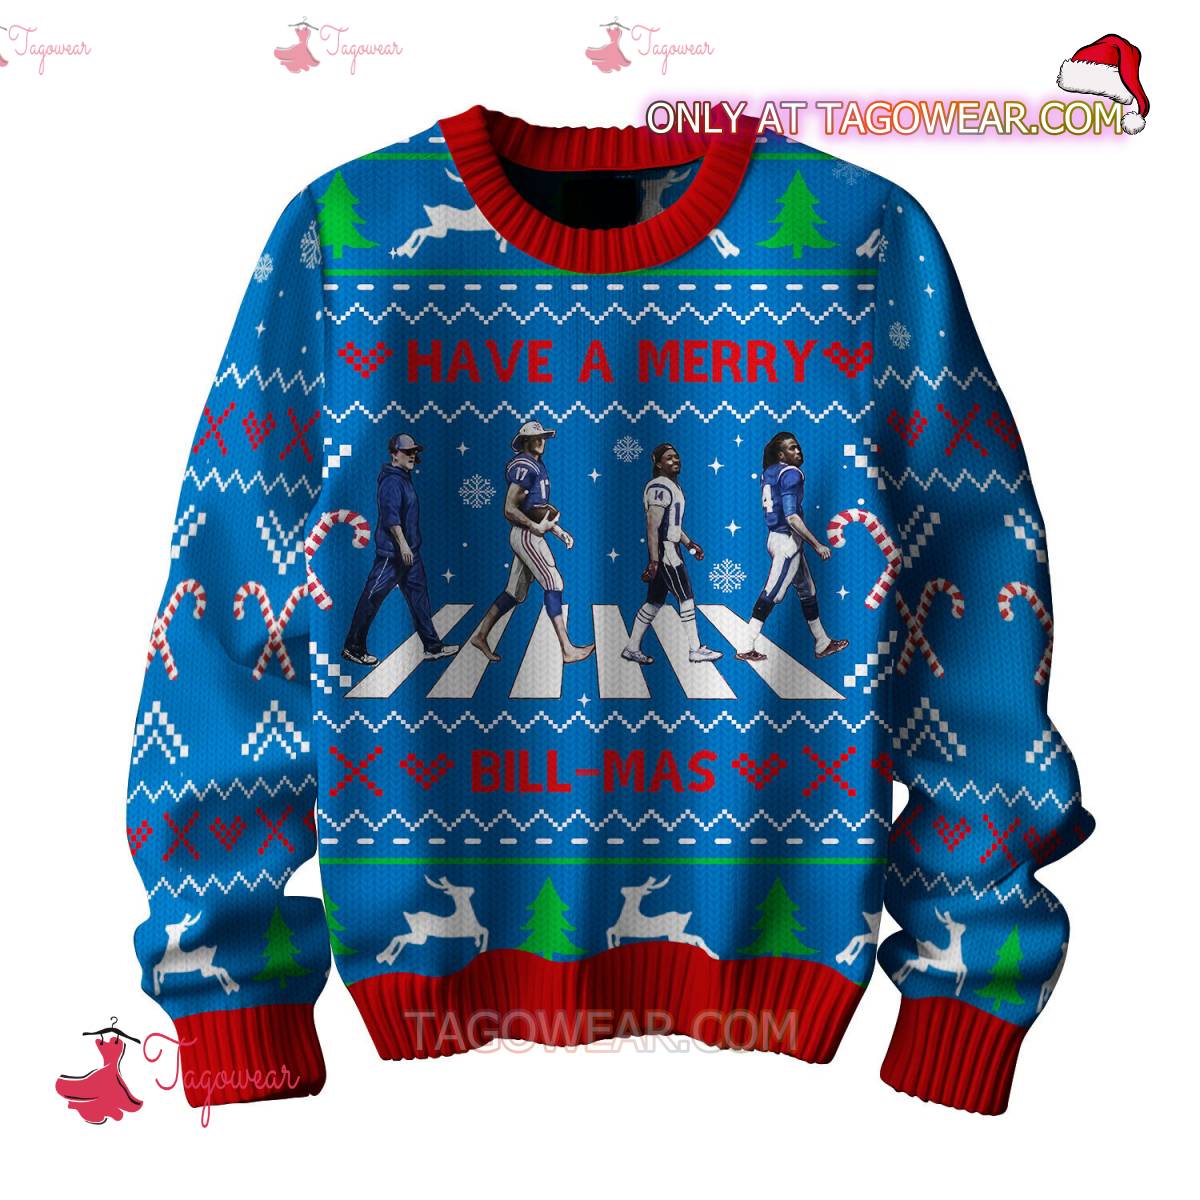 Buffalo Bills On The Road Have A Merry Bill-mas Ugly Christmas Sweater a